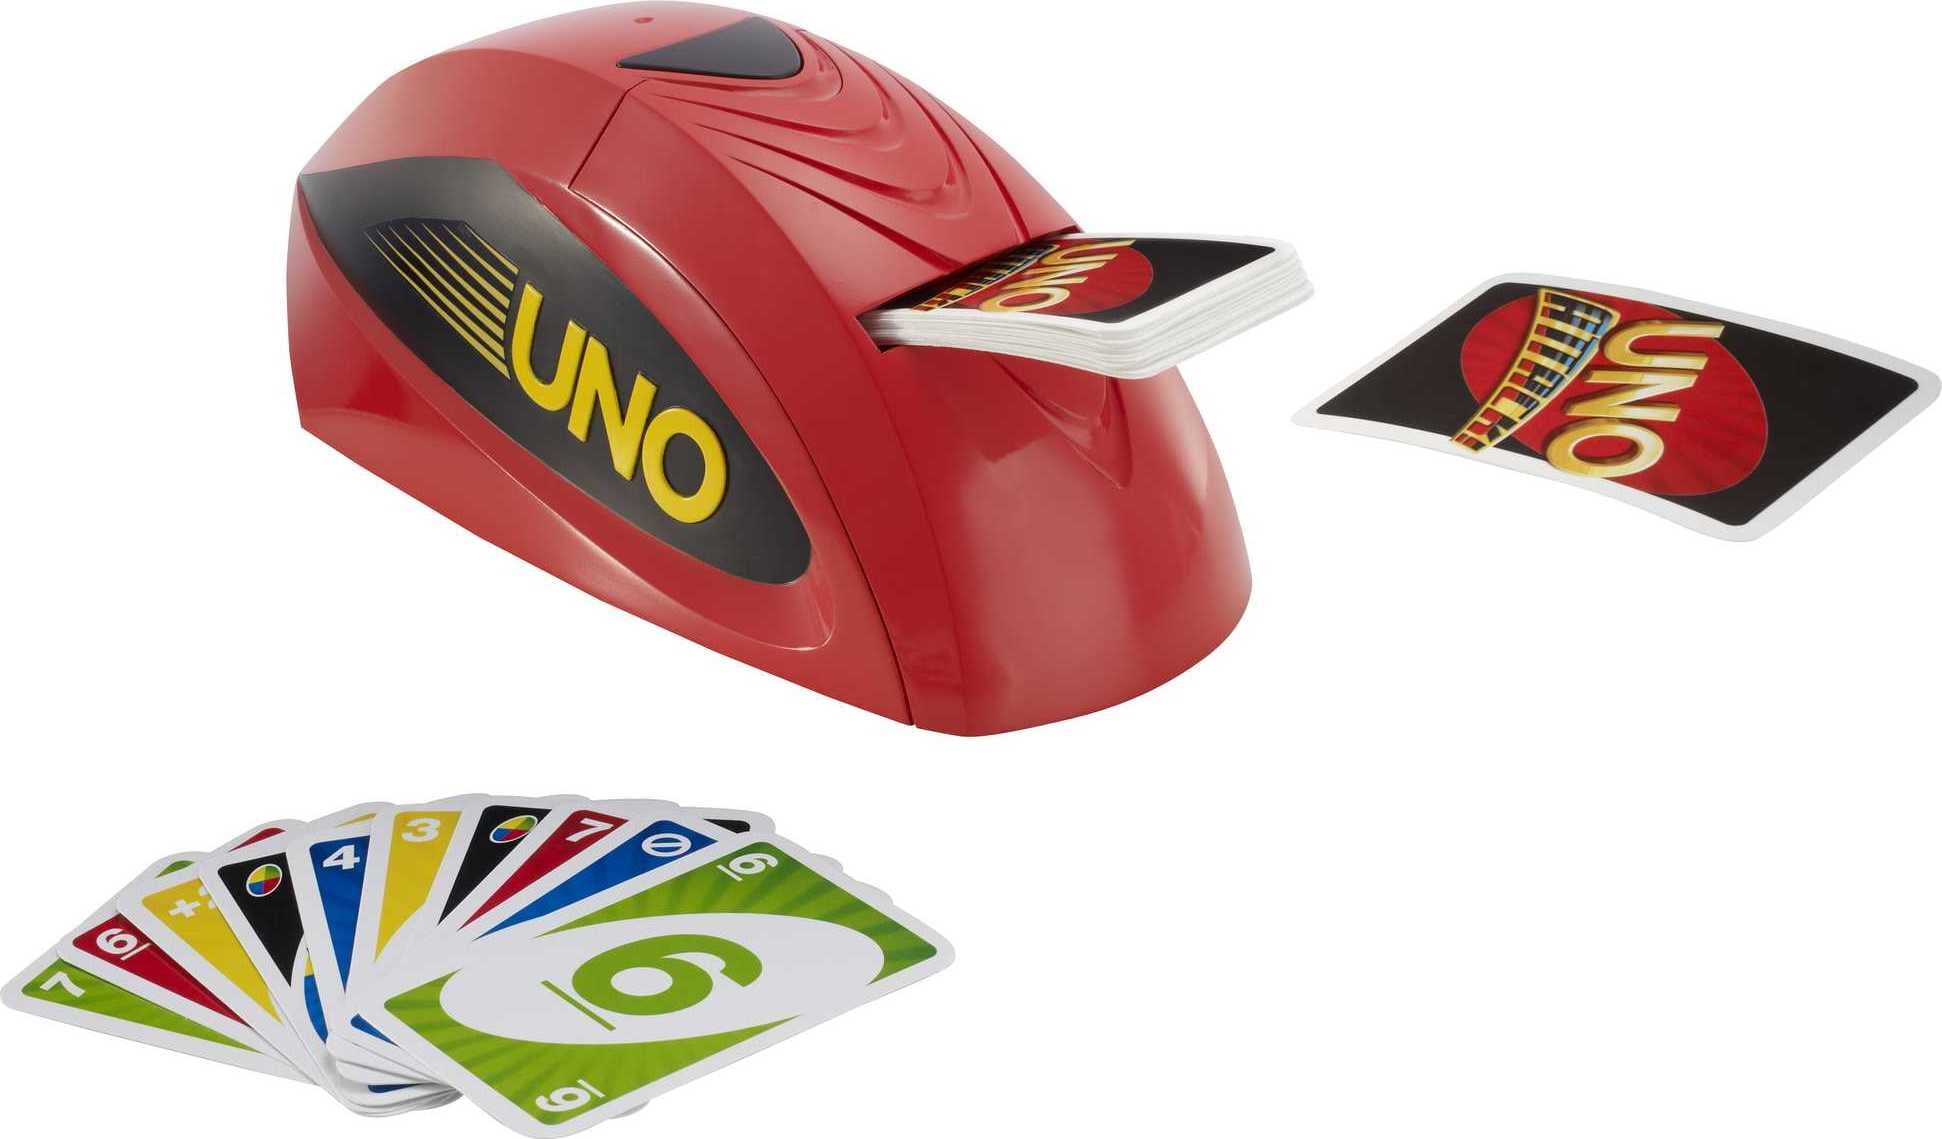  UNO Extreme Card Game Featuring Random-Action Launcher